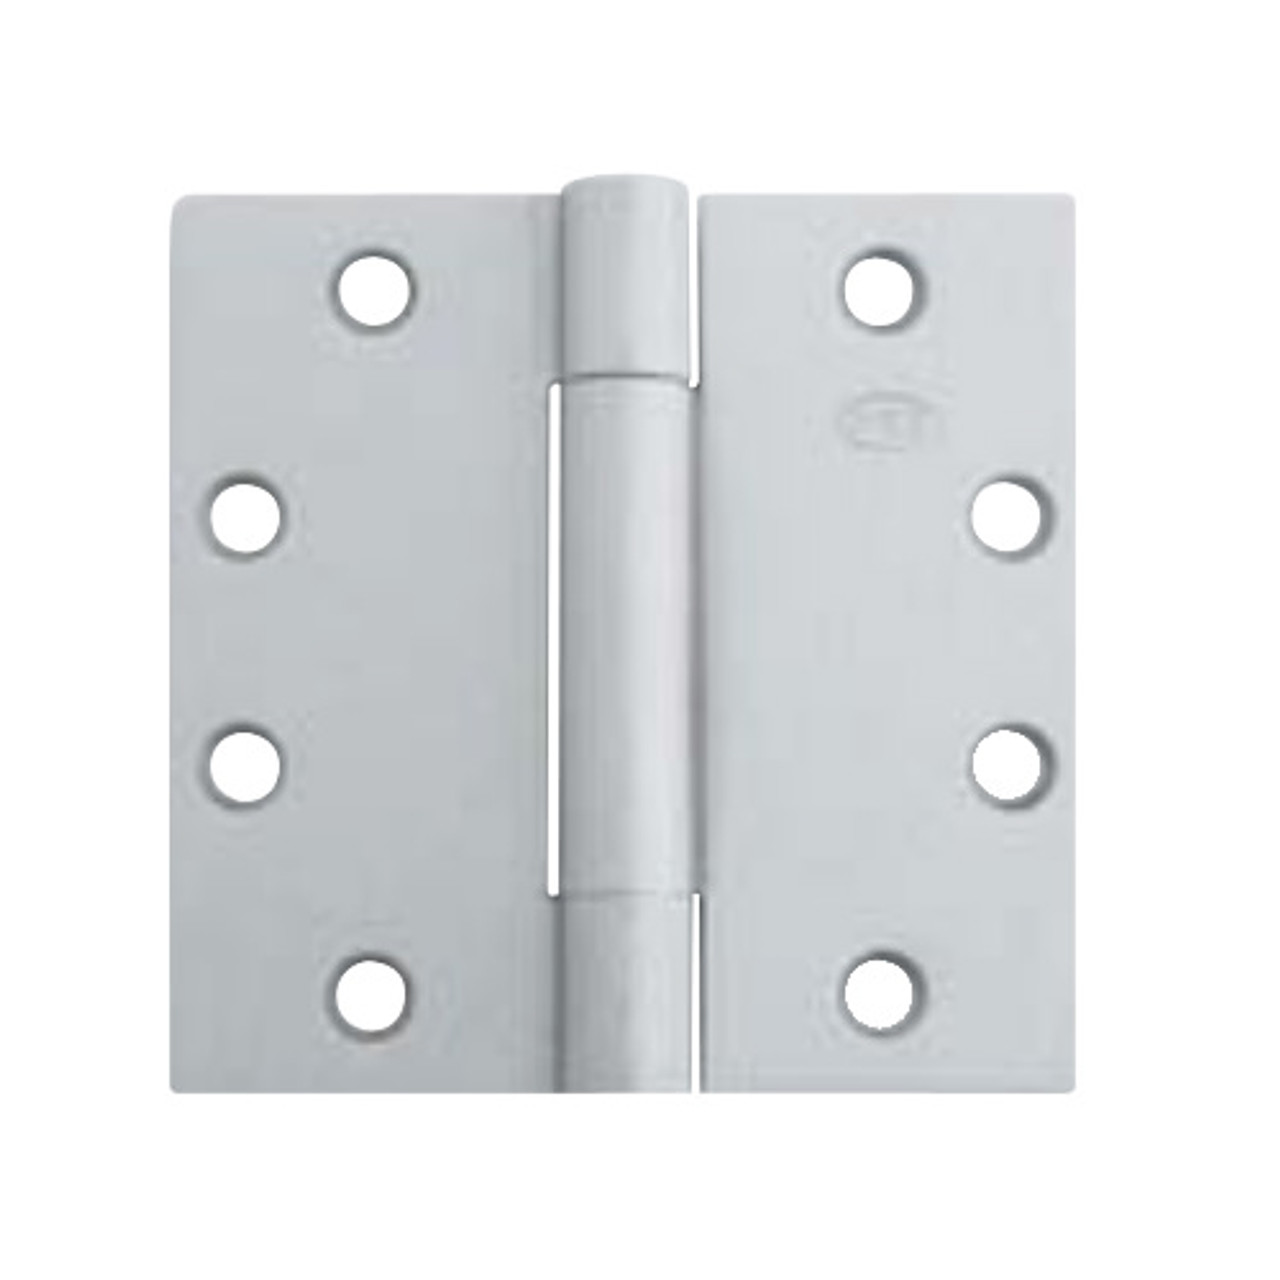 3CB1-5x4-5-600-TW8 IVES 3 Knuckle Concealed Bearing Full Mortise Hinge with Electric Thru-Wire in Primed for Paint - Steel